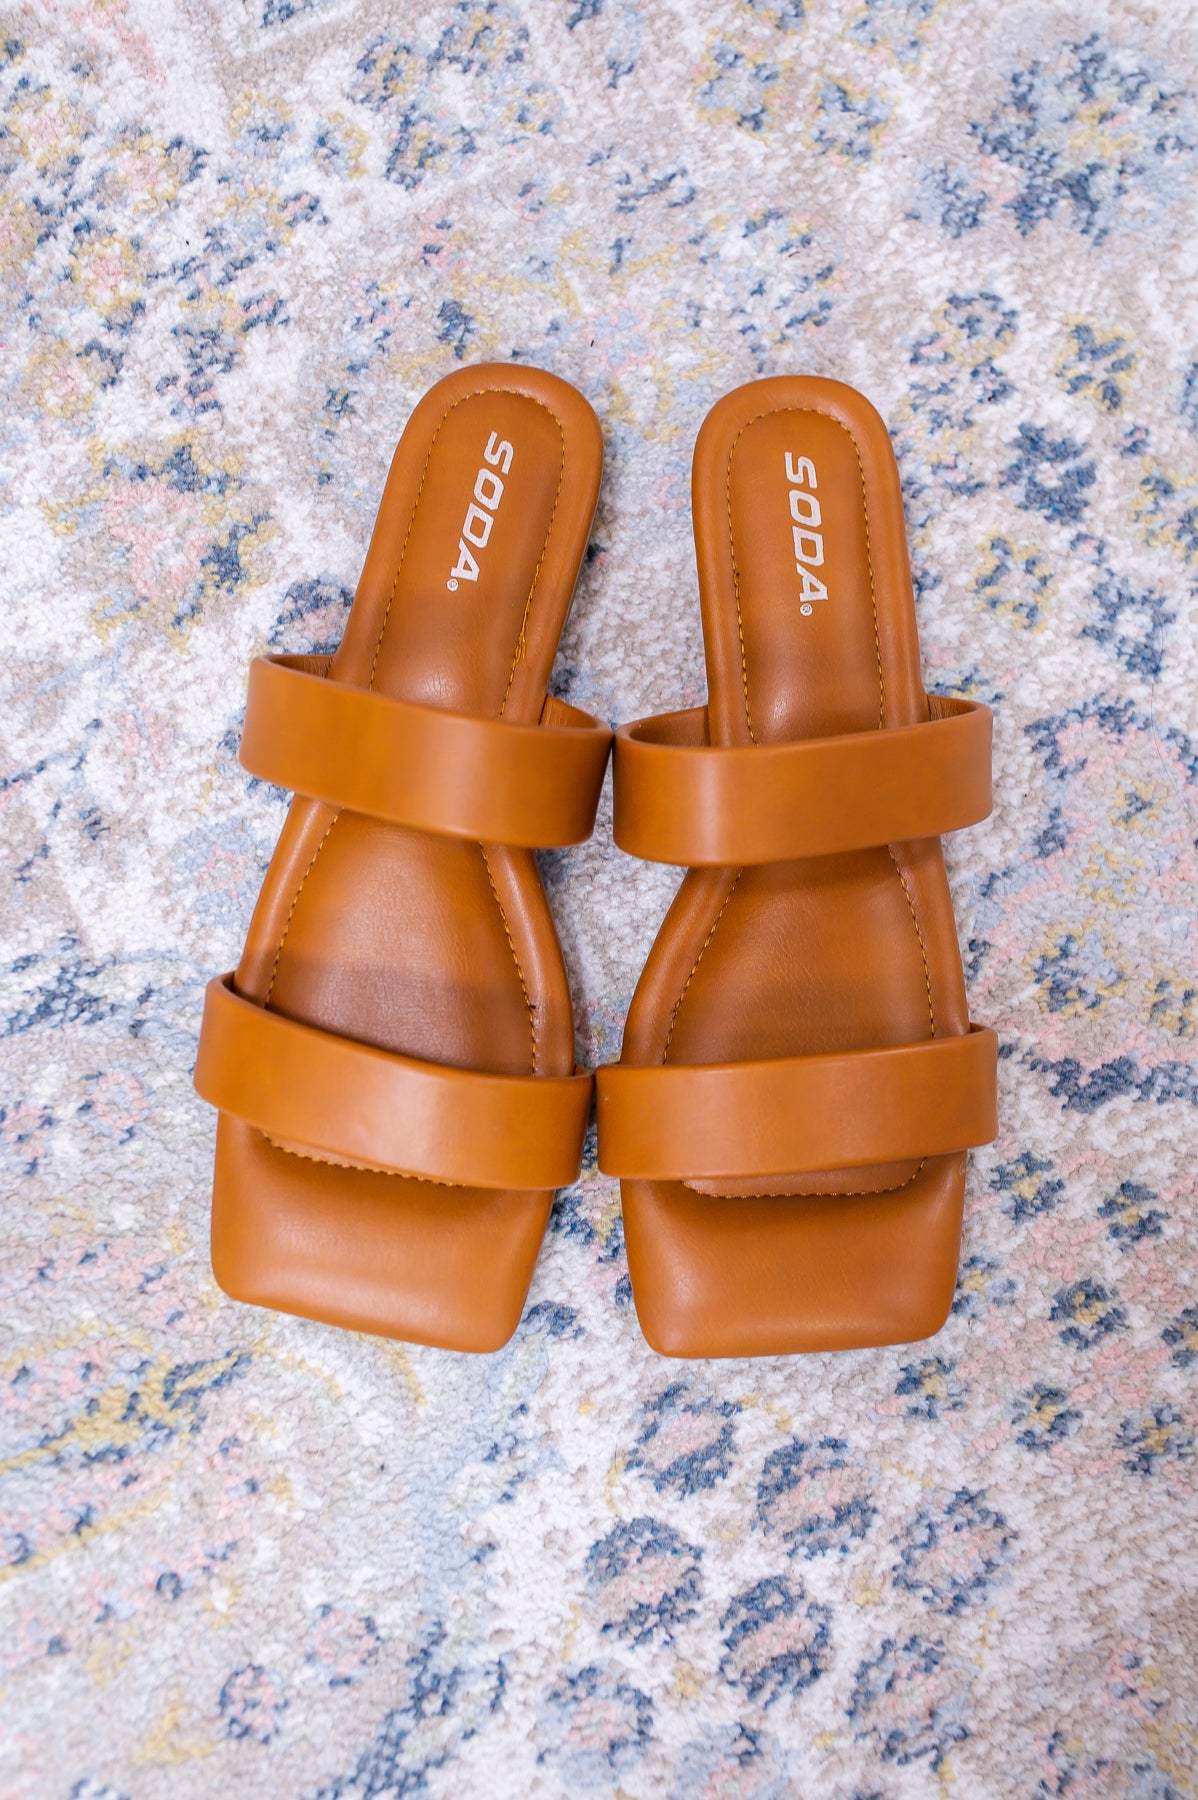 Casual Occasions Tan Slip On Sandals - SHO2552TN